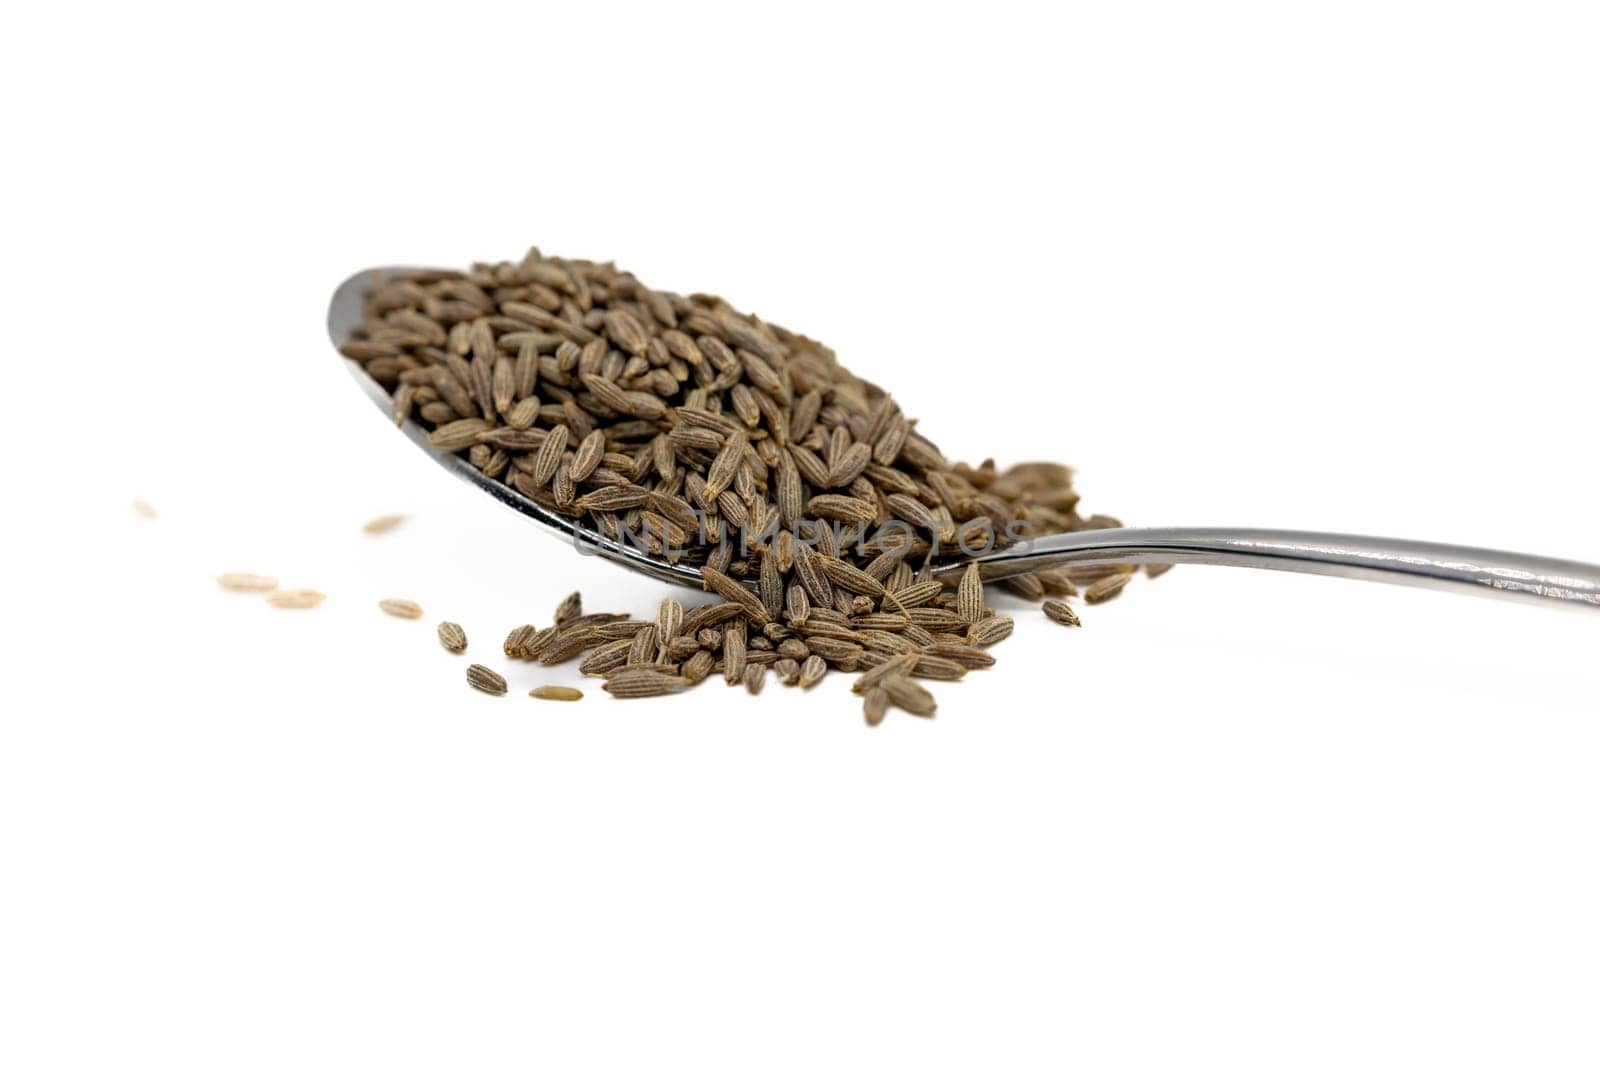 A close-up shot of a spoon delicately holding a generous portion of Cumin seeds, creating a delightful and appetizing image